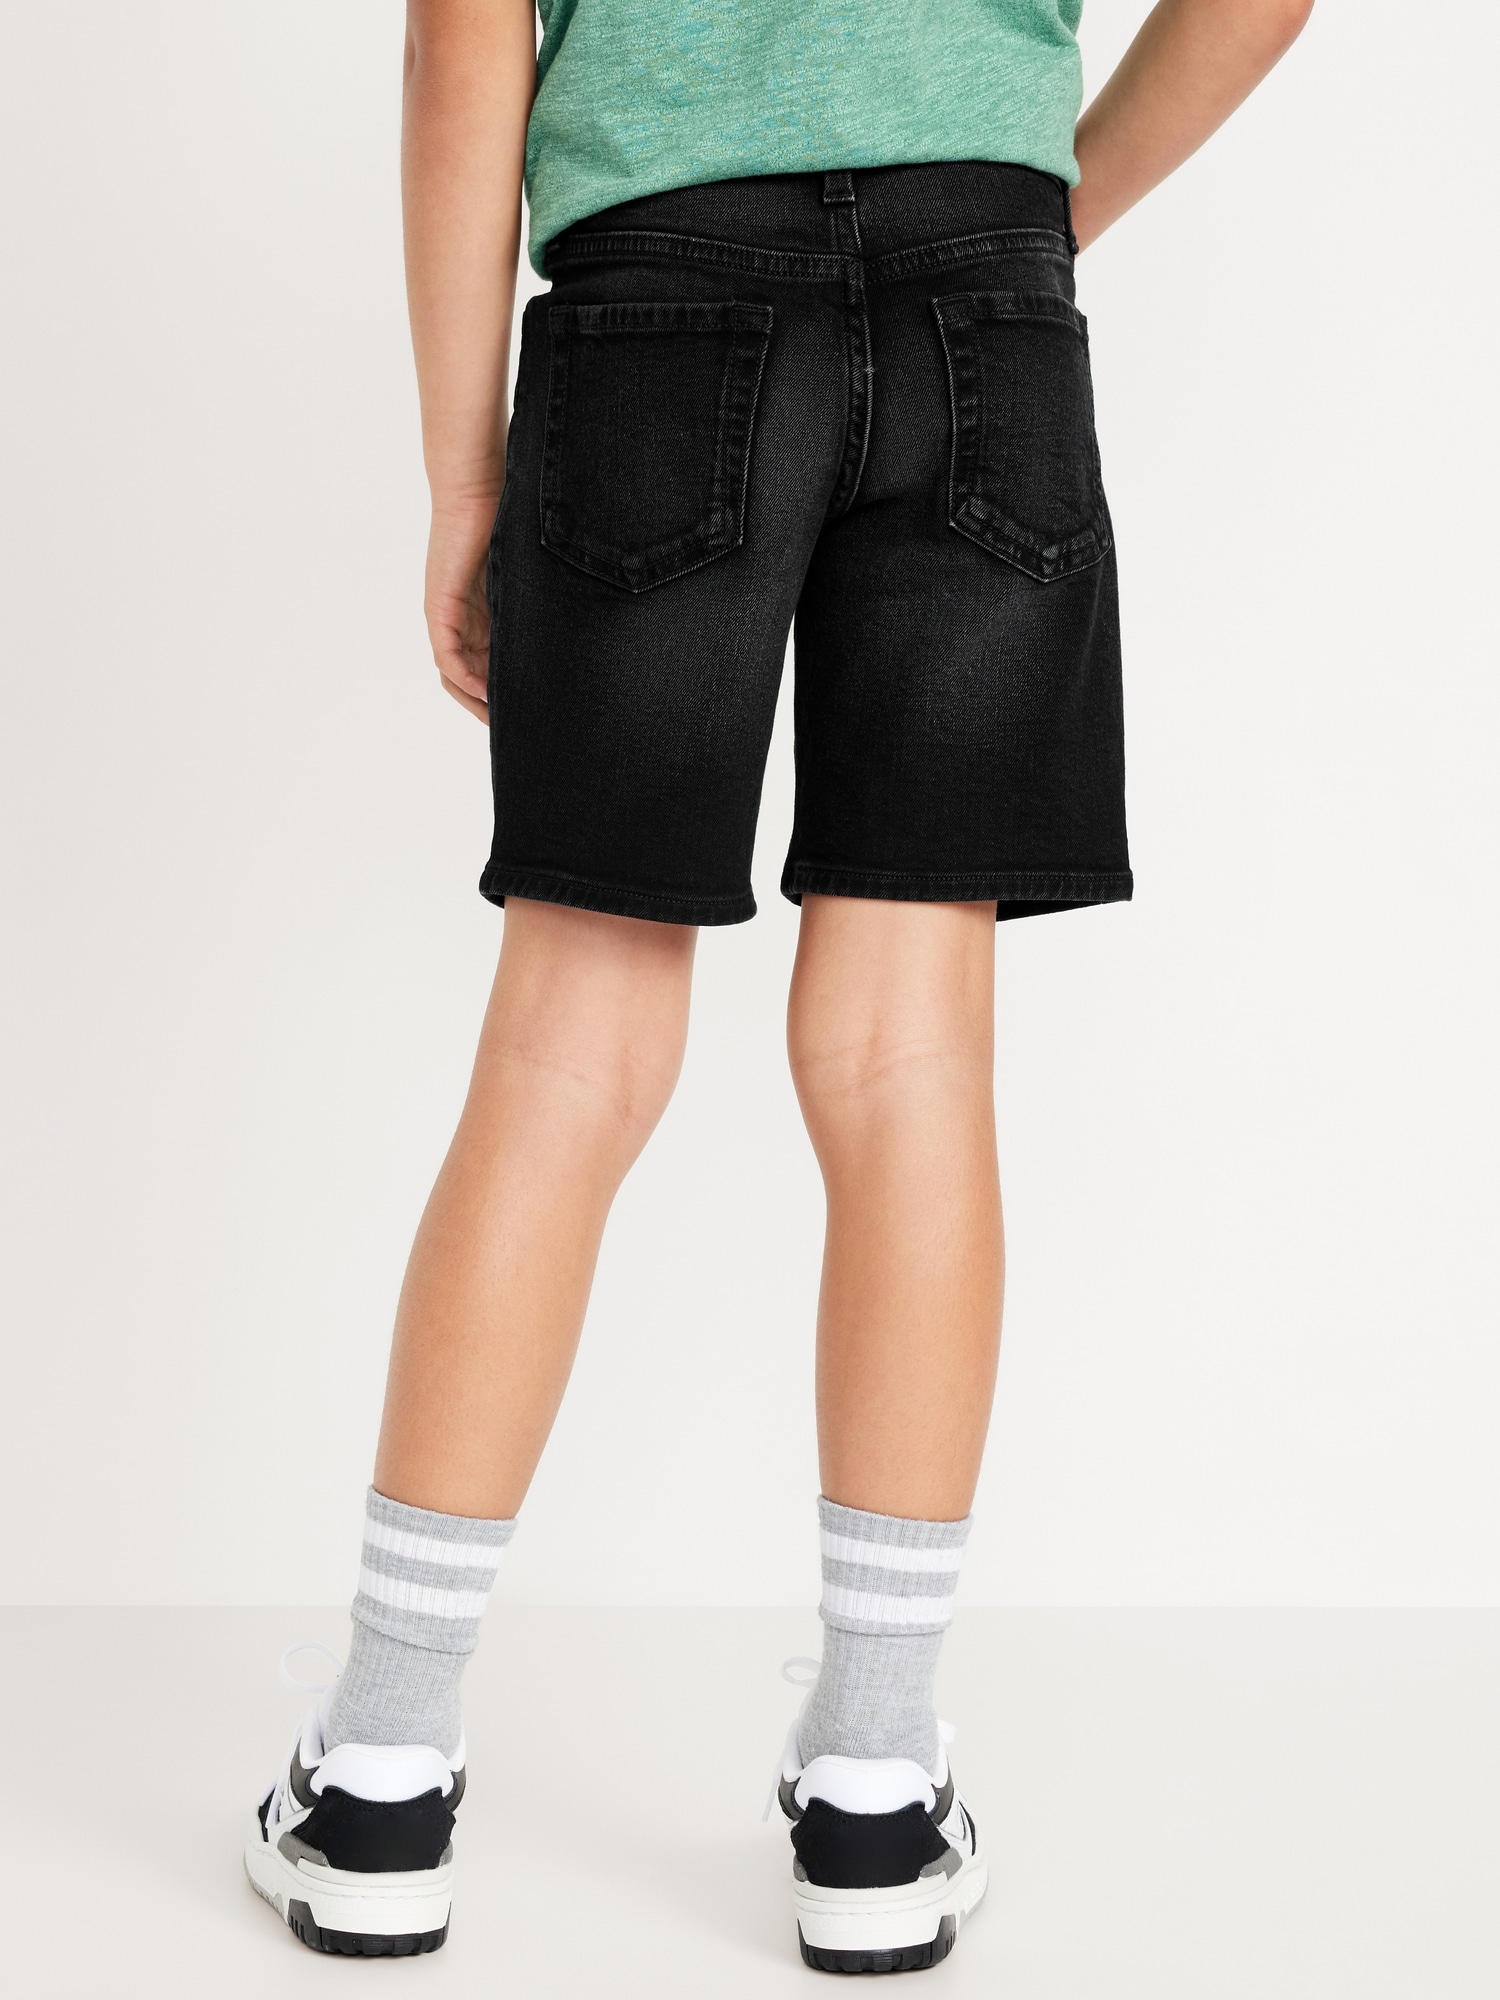 Above Knee 360° Stretch Ripped Jean Shorts for Boys